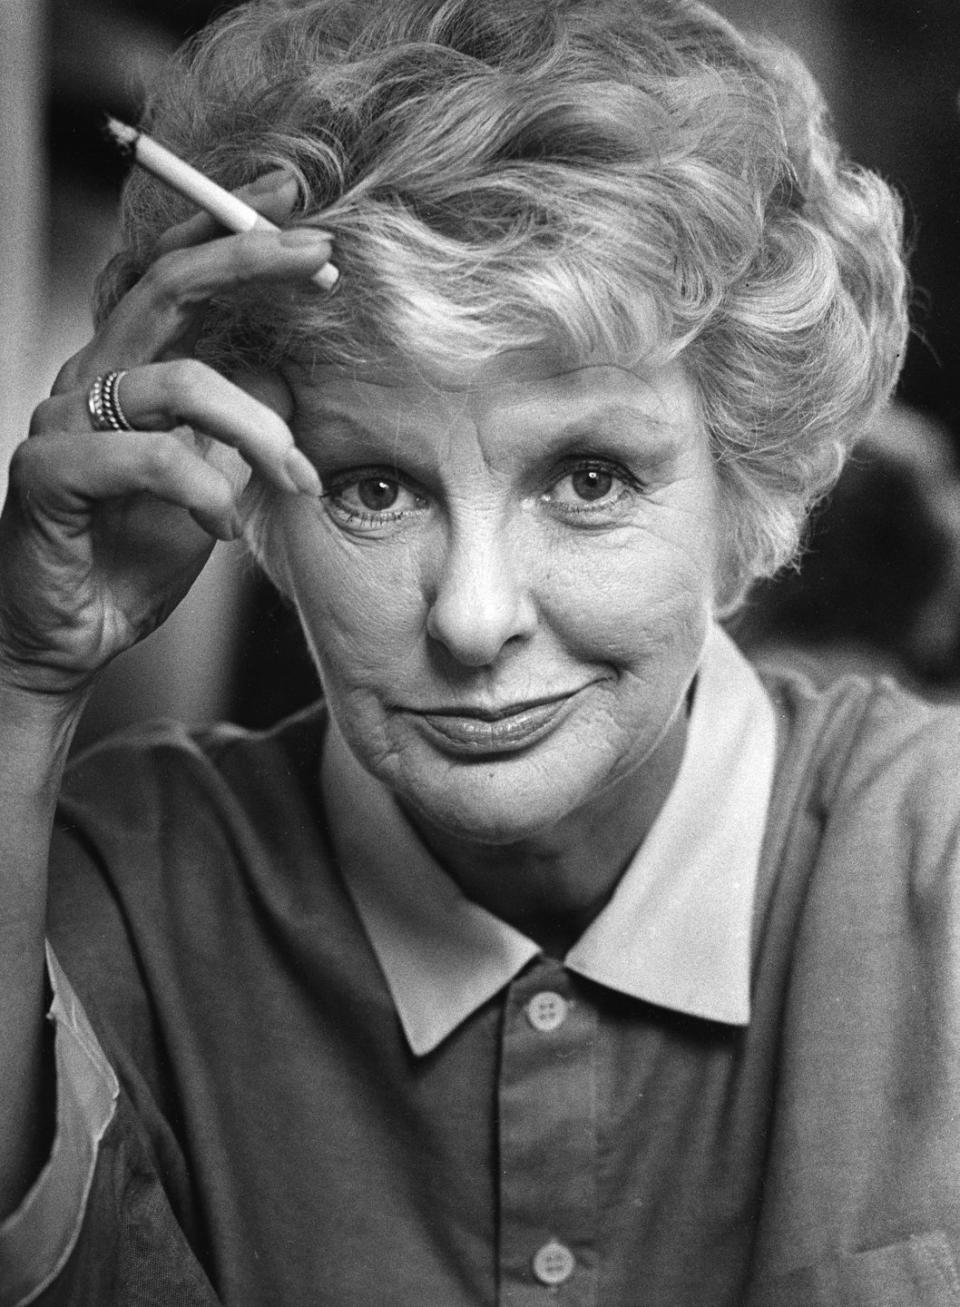 Elaine Stritch auditioned for the role of Dorothy.